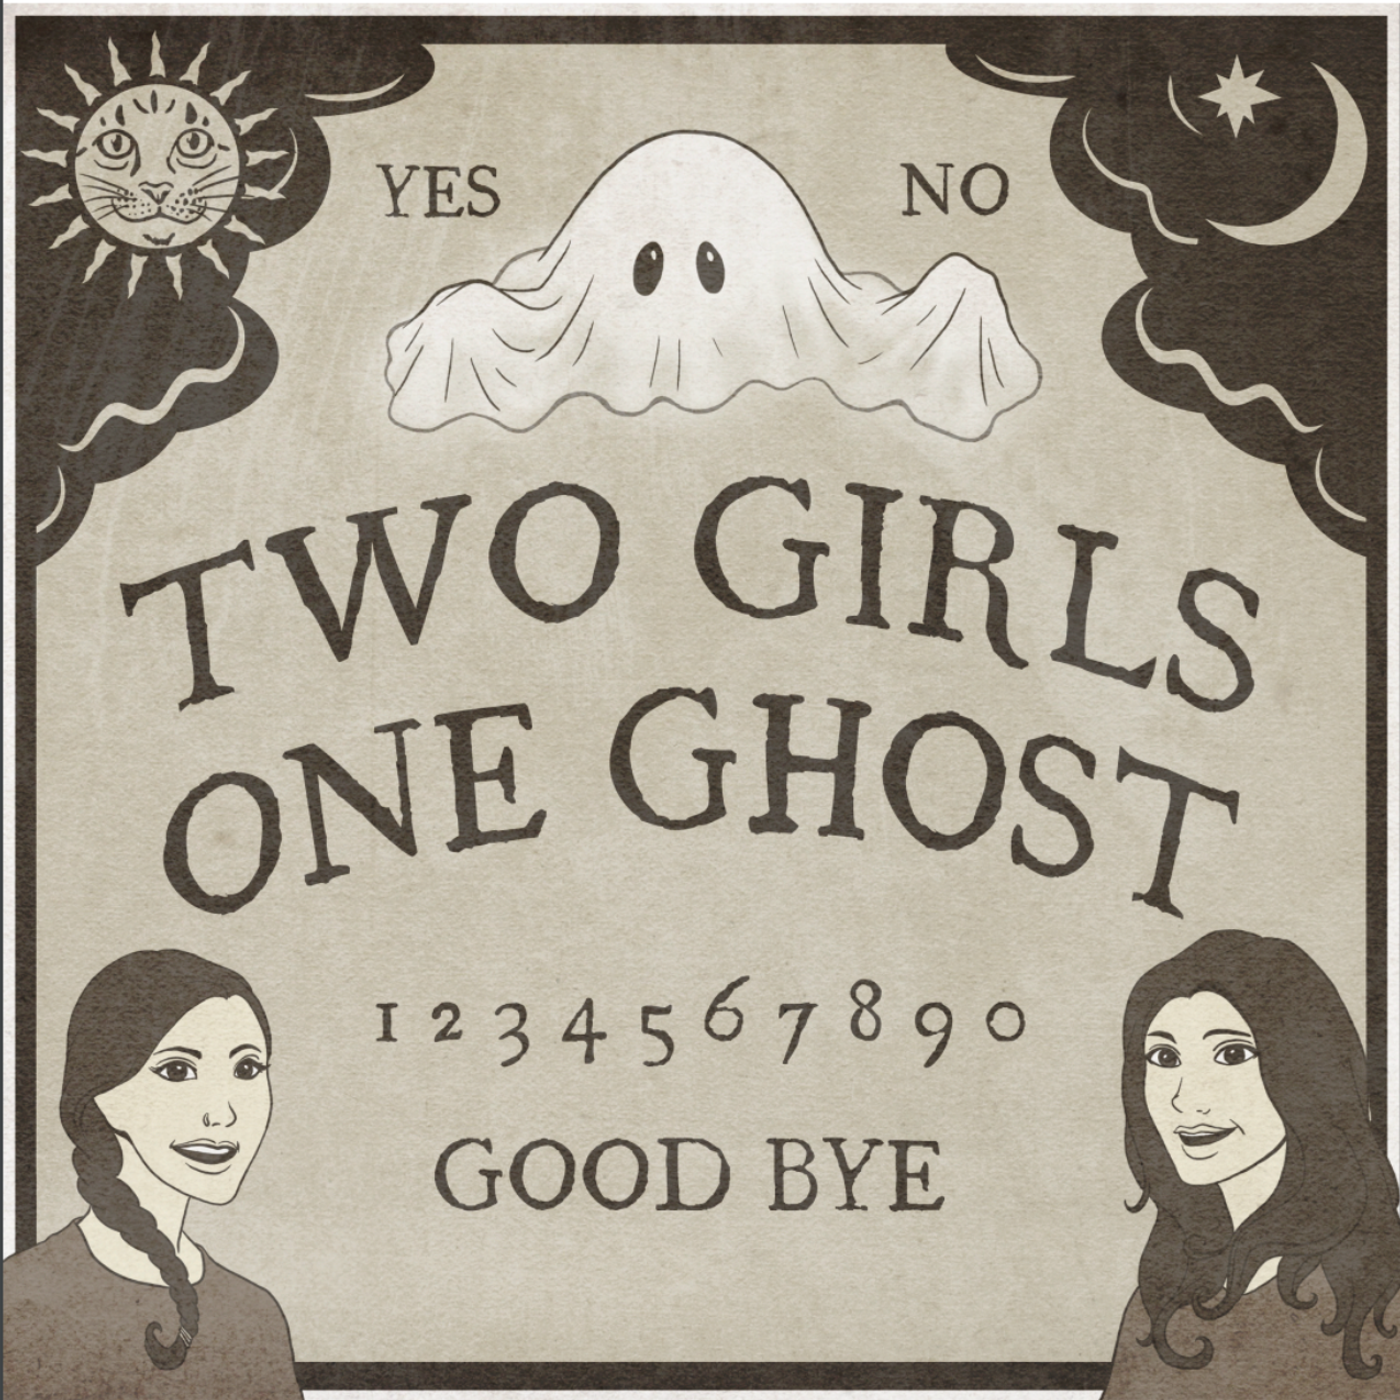 Two Girls One Ghost podcast show image